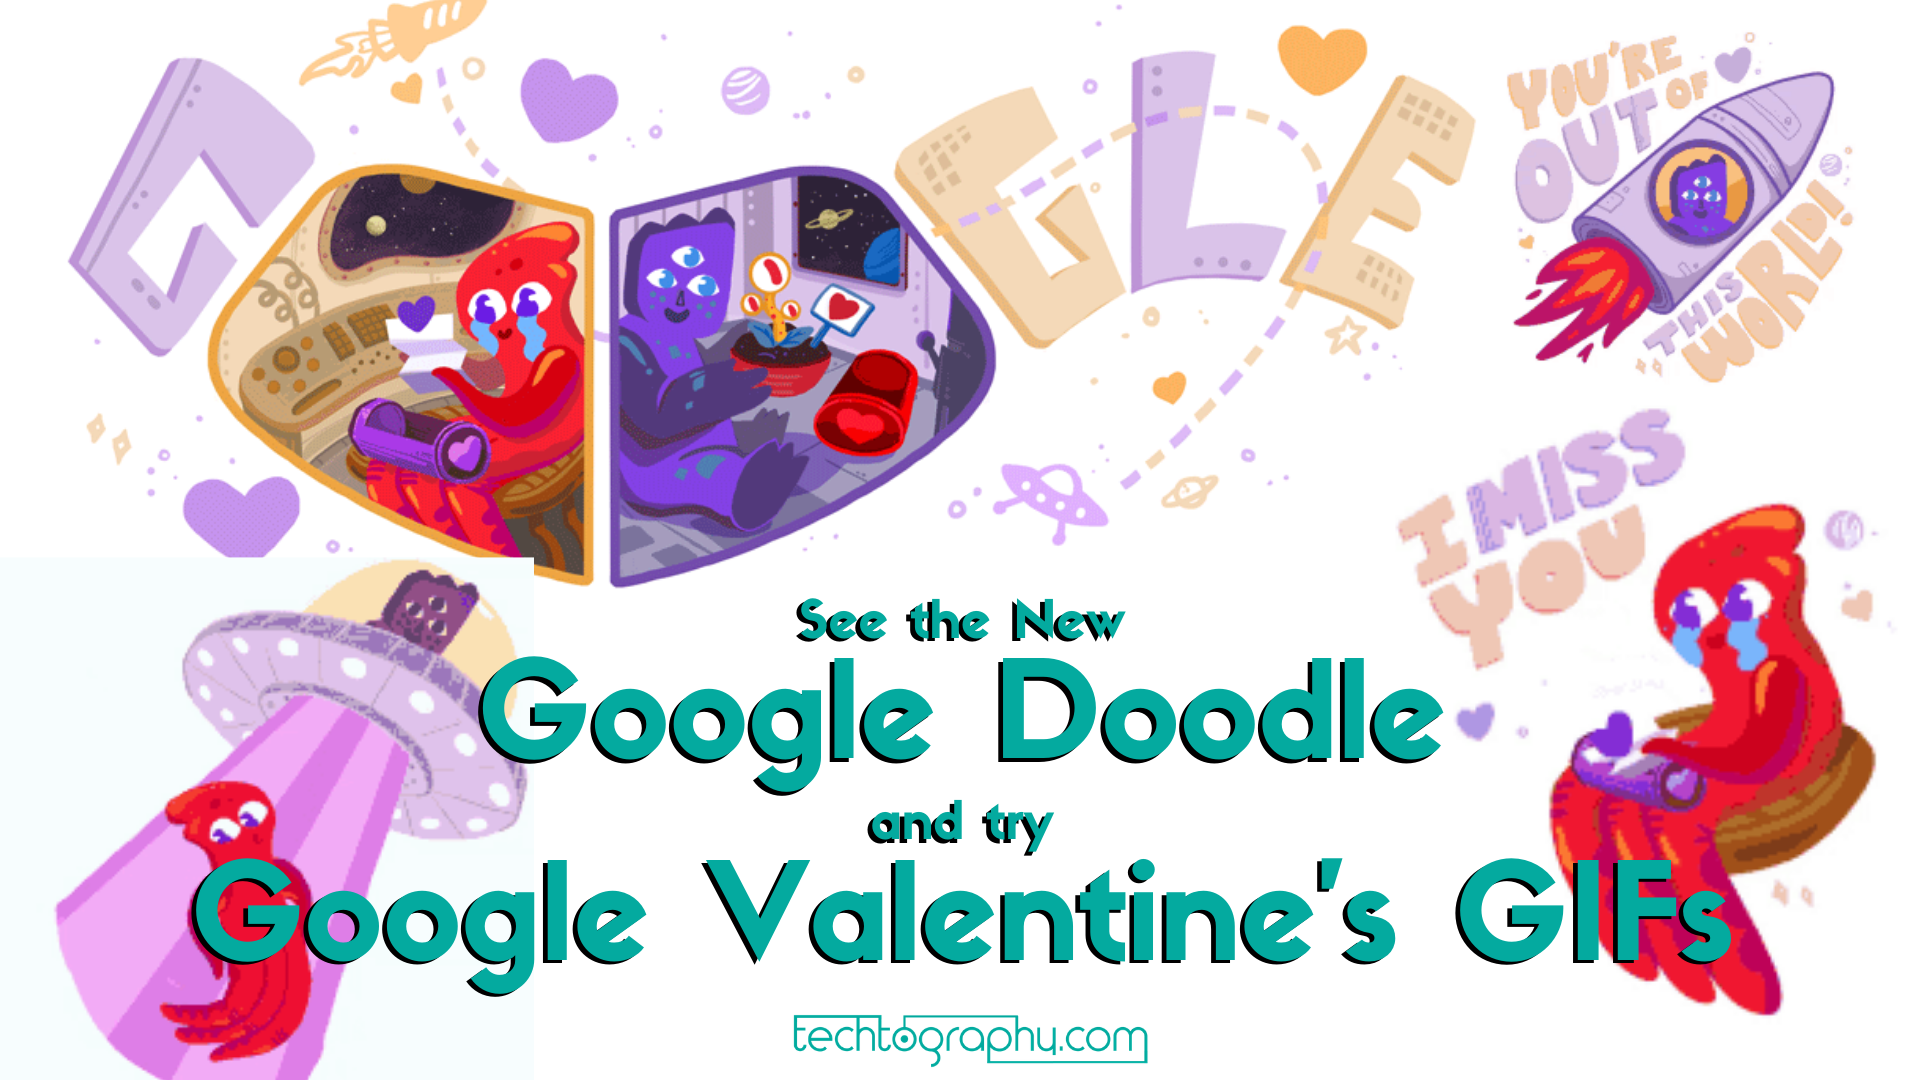 See the New Google Doodle and try Google Valentine’s GIFs Techtography